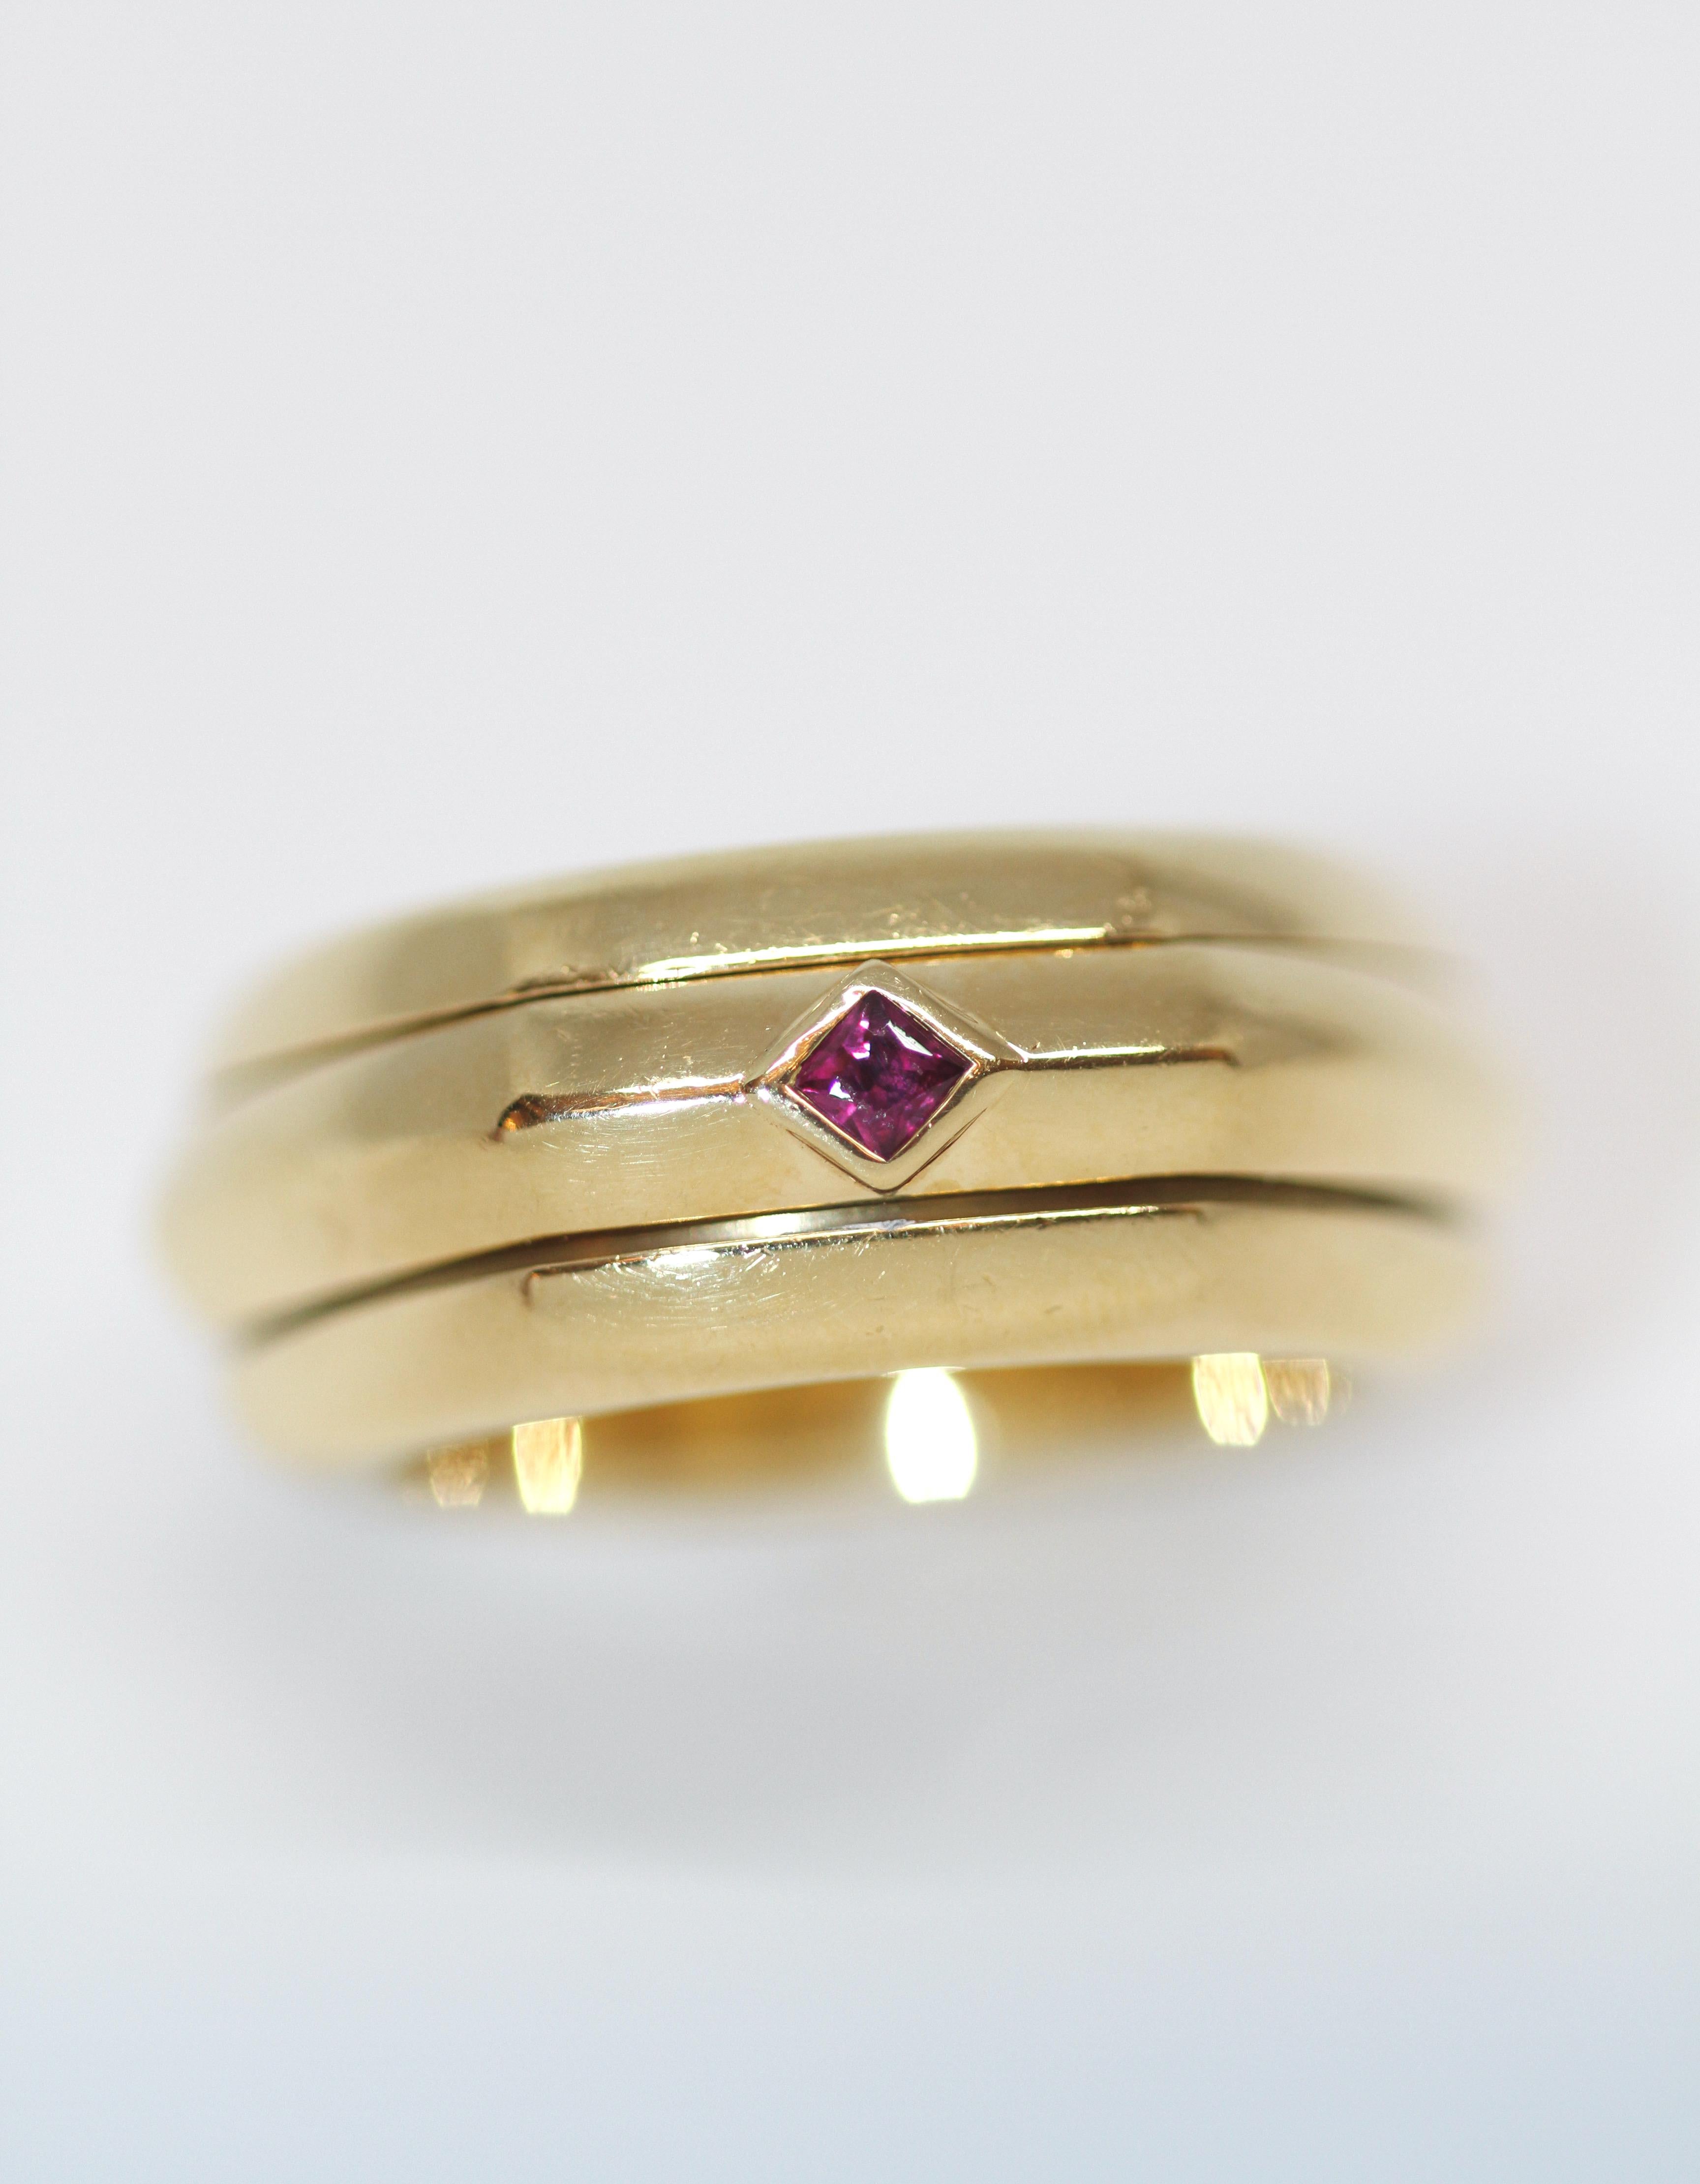 This elegant ring signed from the house of Piaget is made in 18kt yellow gold and set with a ruby. 
The hexagonal center ring is turning in between the other 2 bands.

Year: 1998
Collection: Possession
Material: 18 kt yellow gold and ruby
Size: